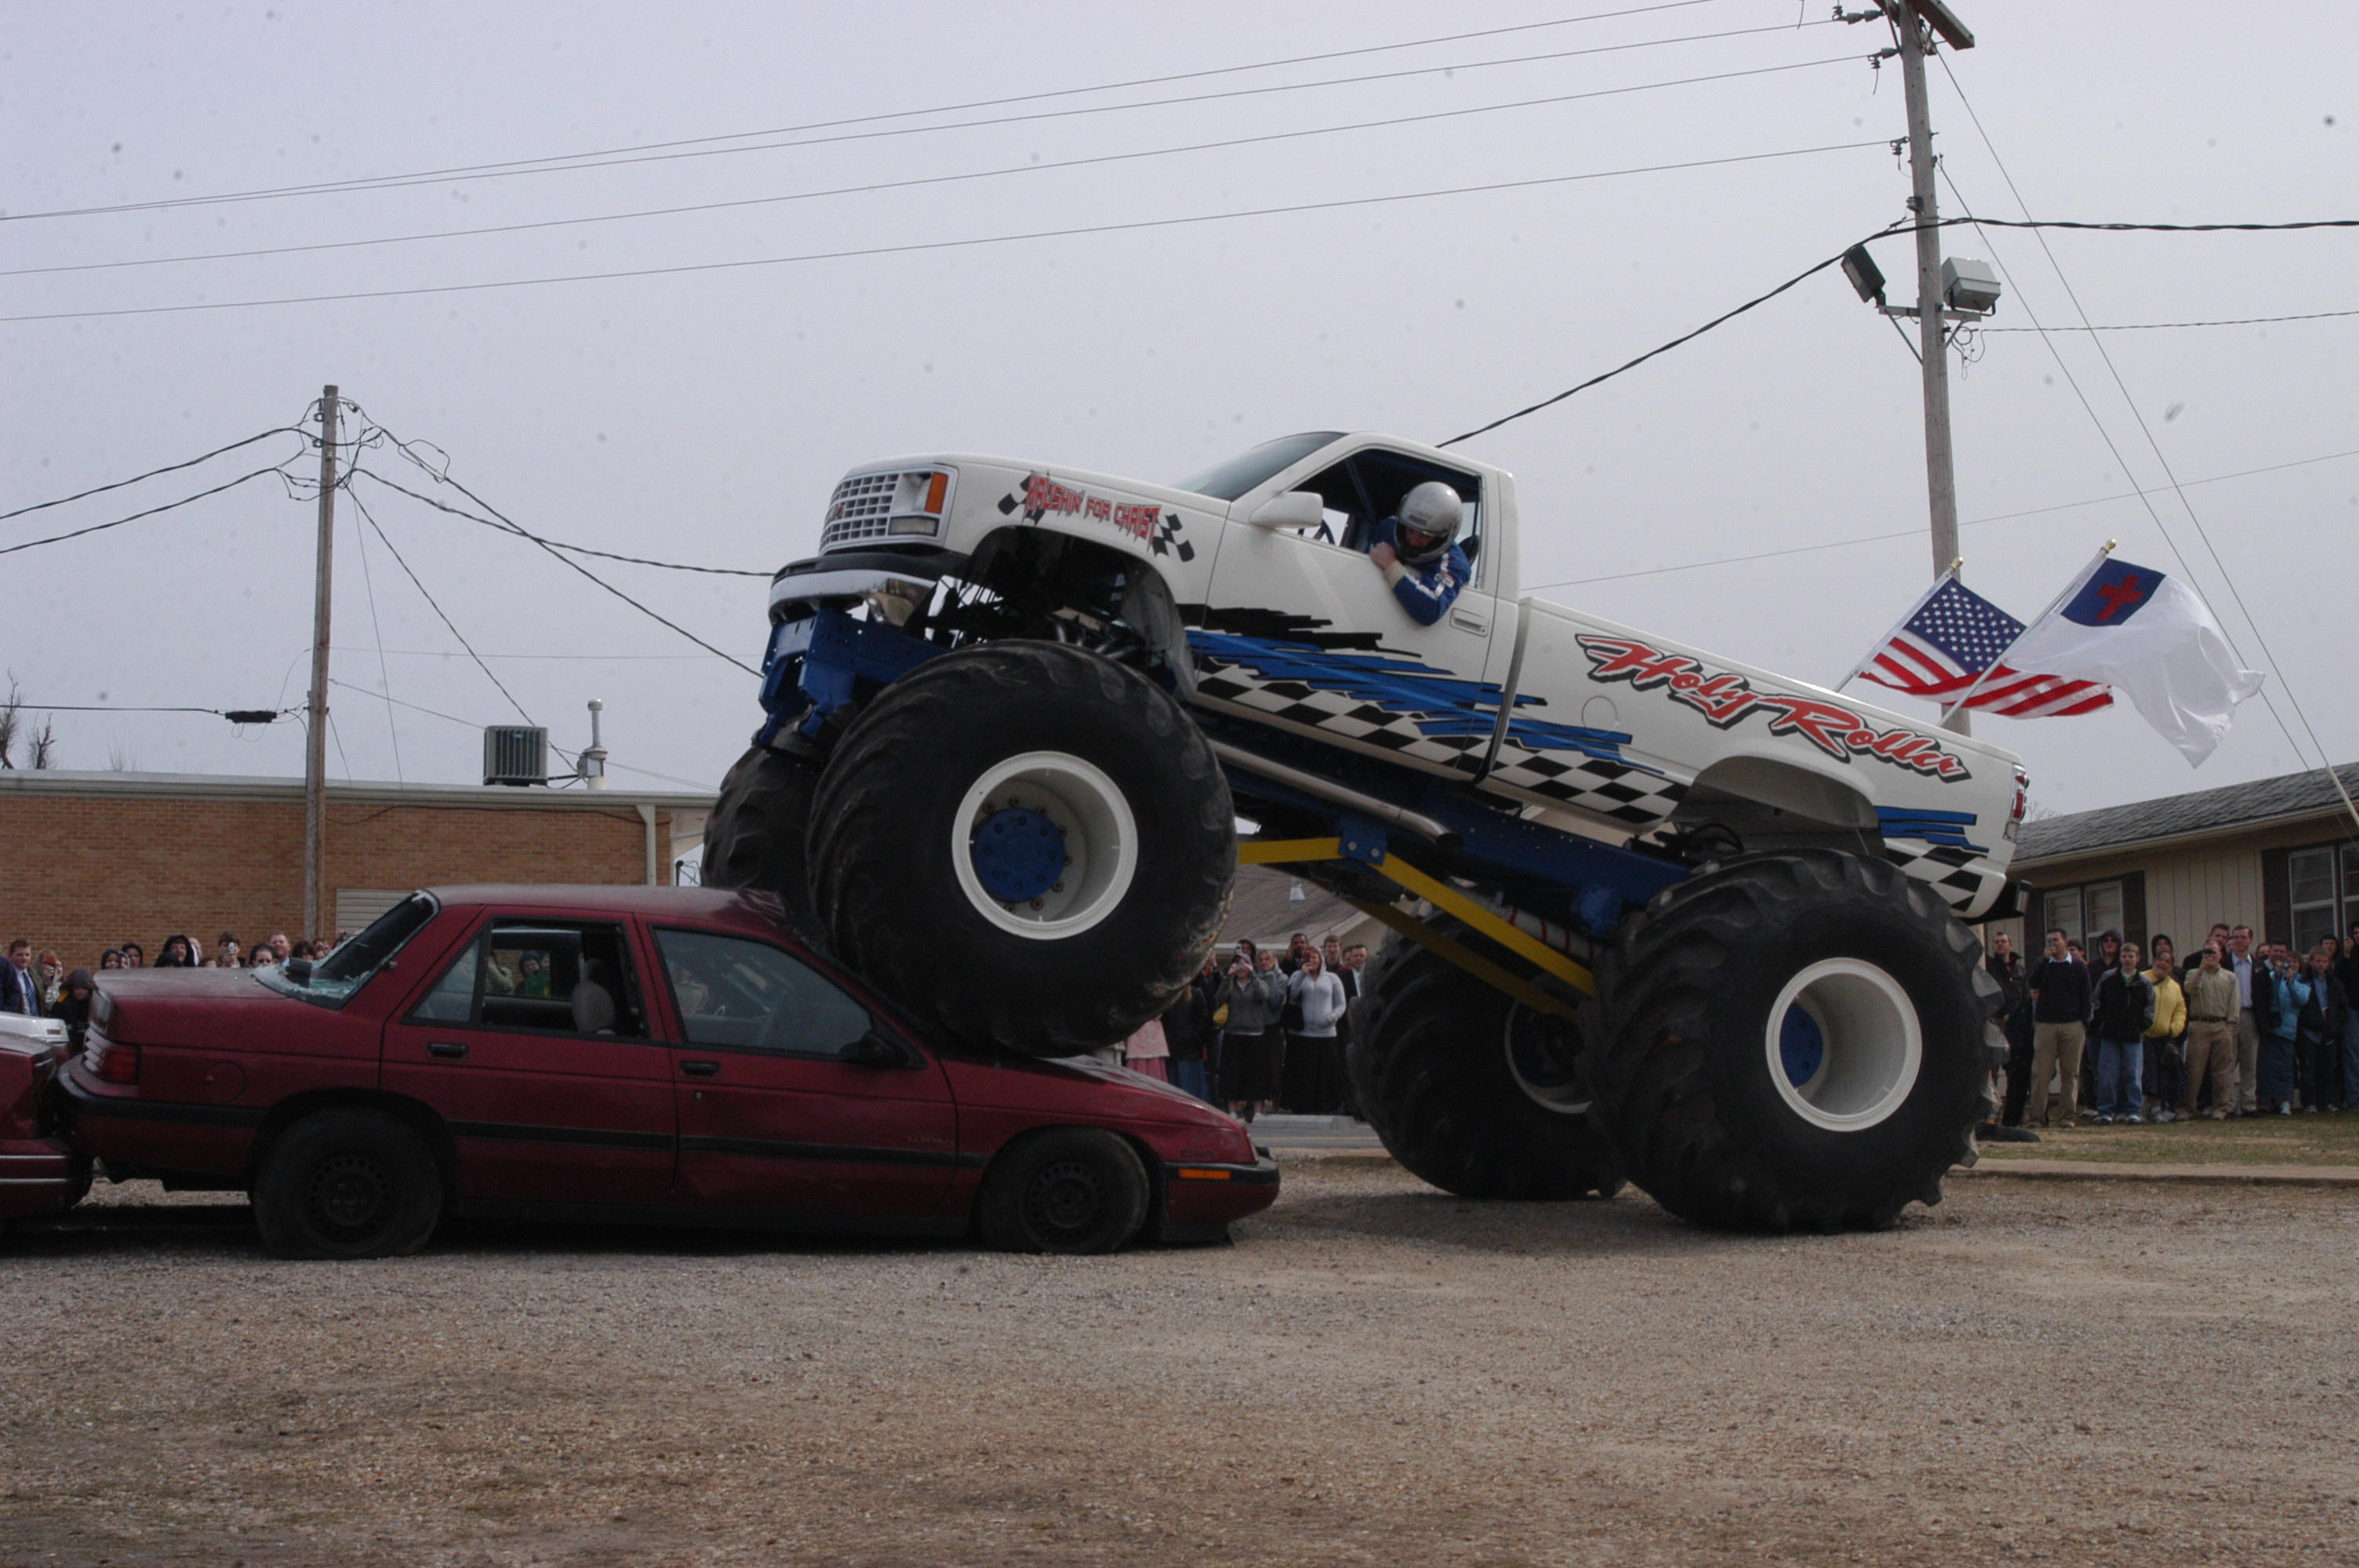 Holy Roller Monster Truck rolling over and crushing cars at this show